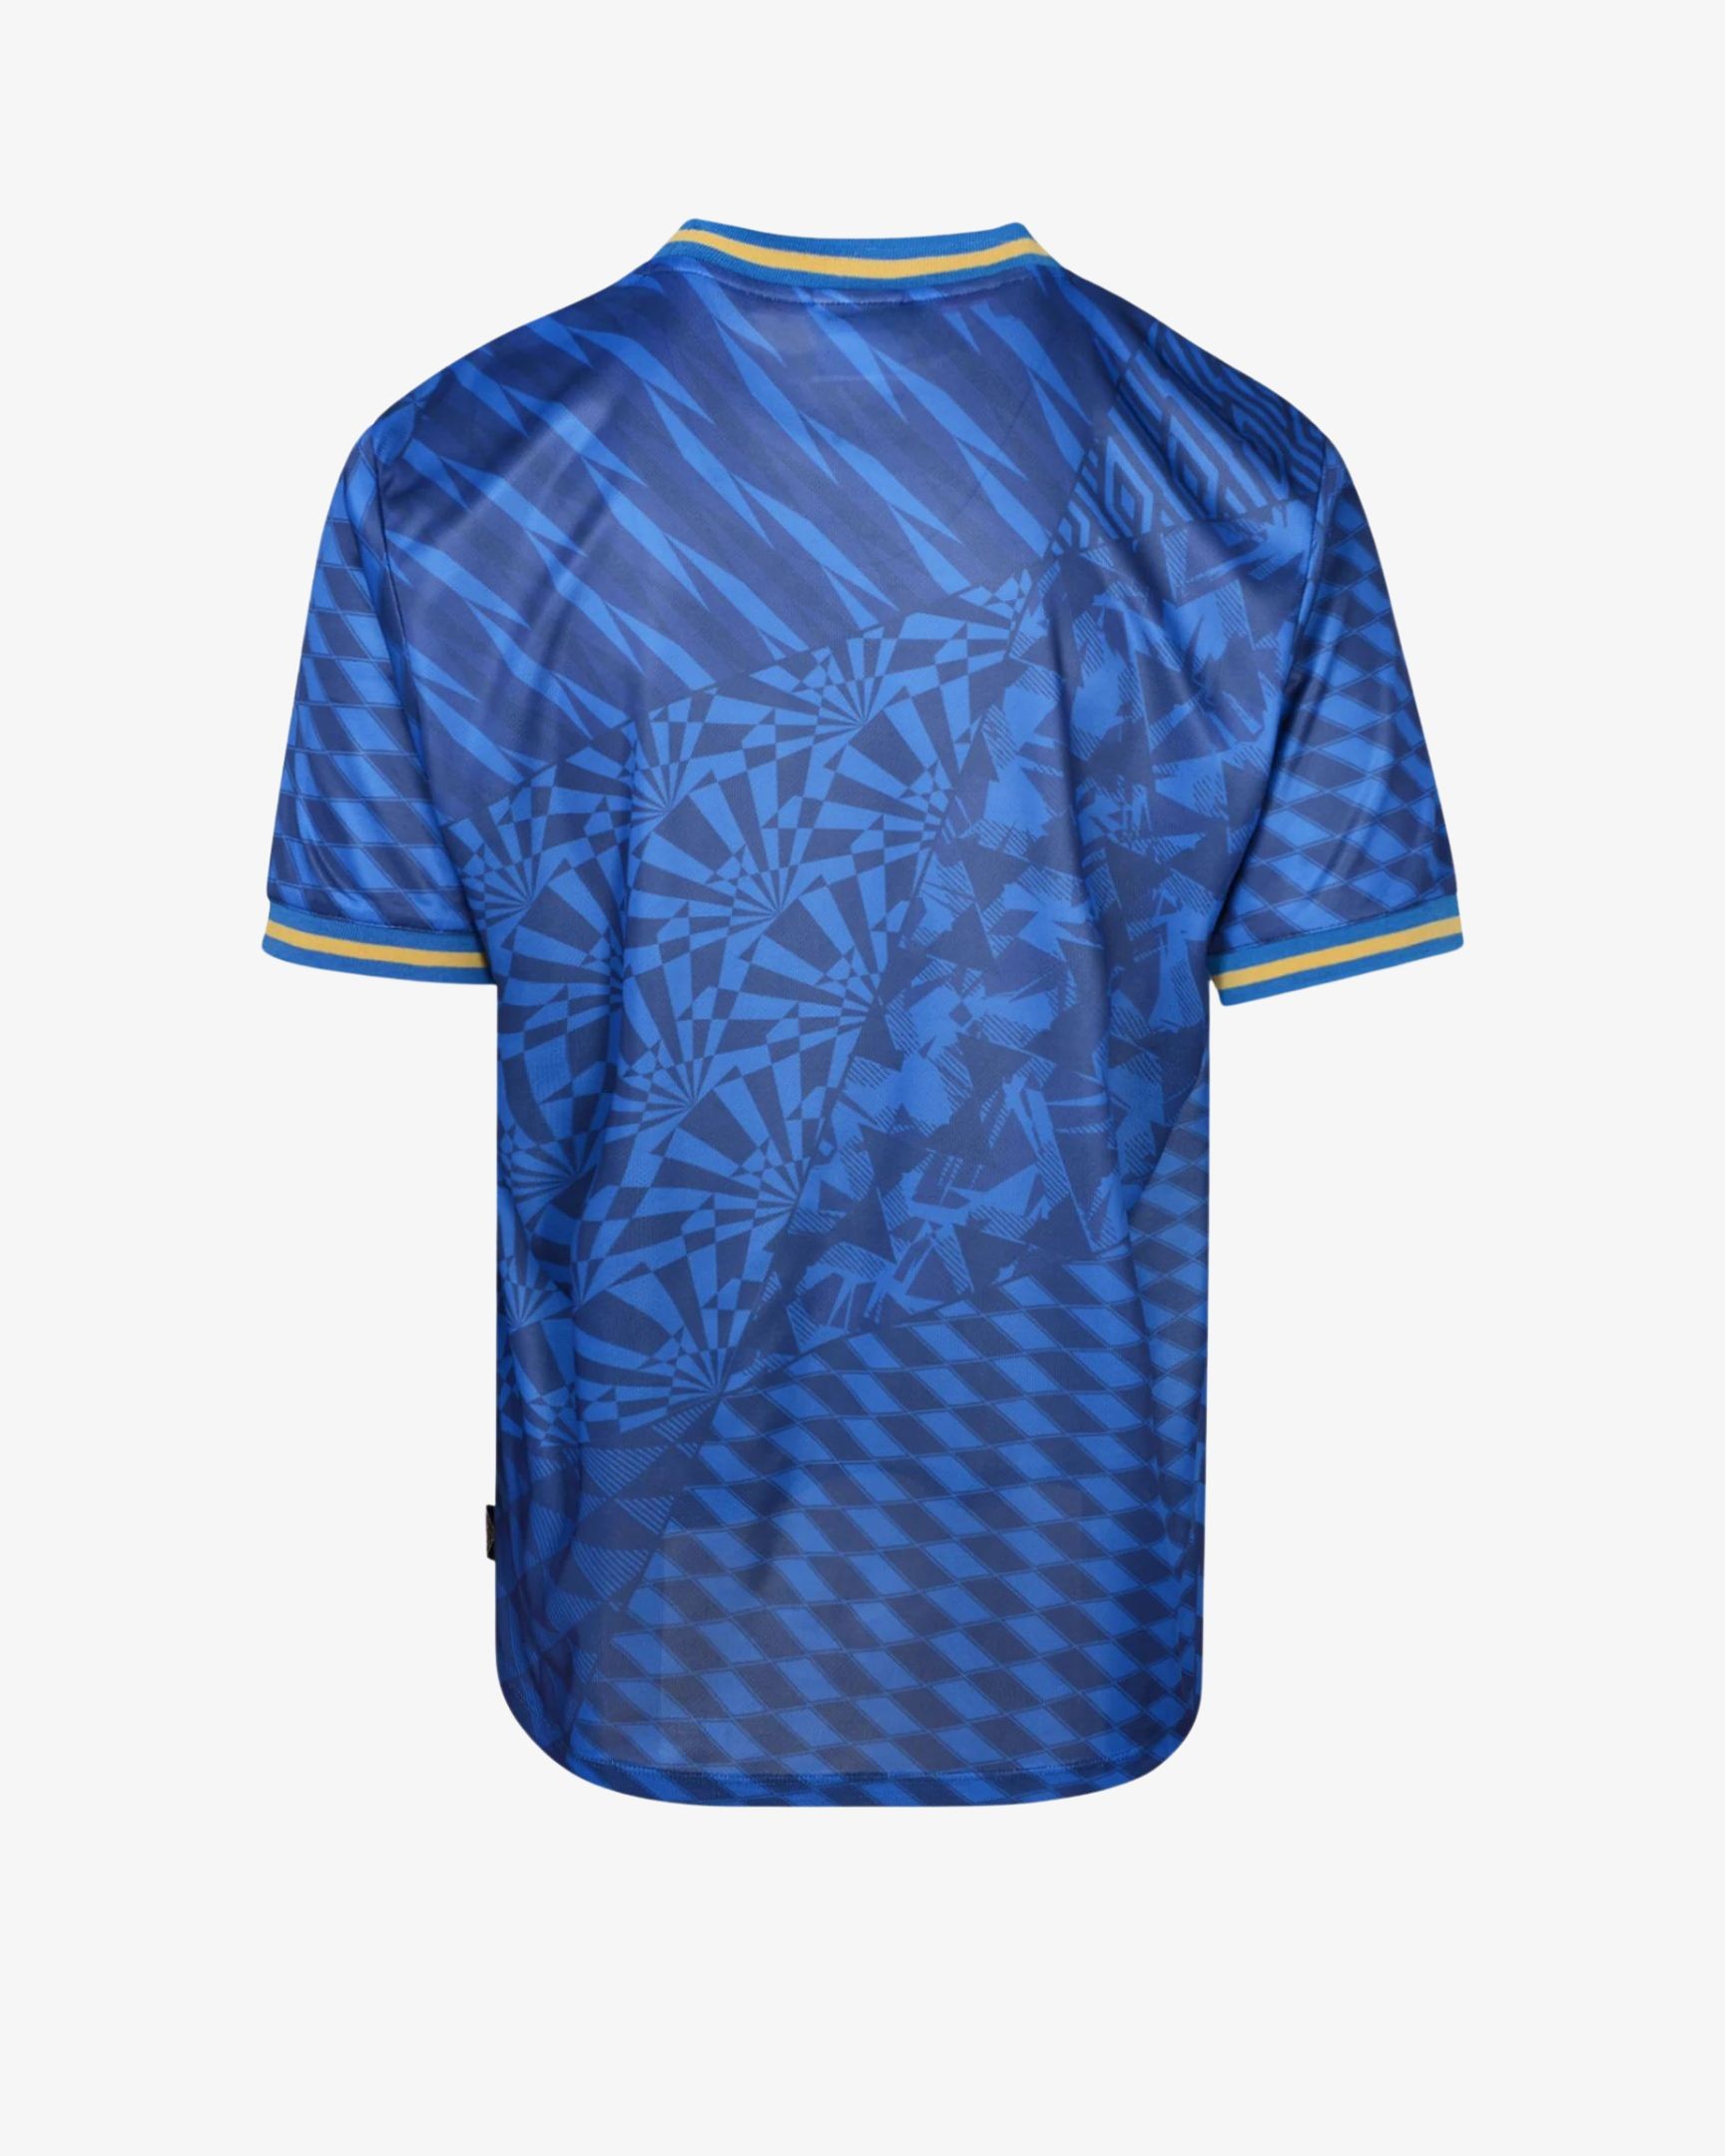 ITALY ICONIC GRAPHIC JERSEY